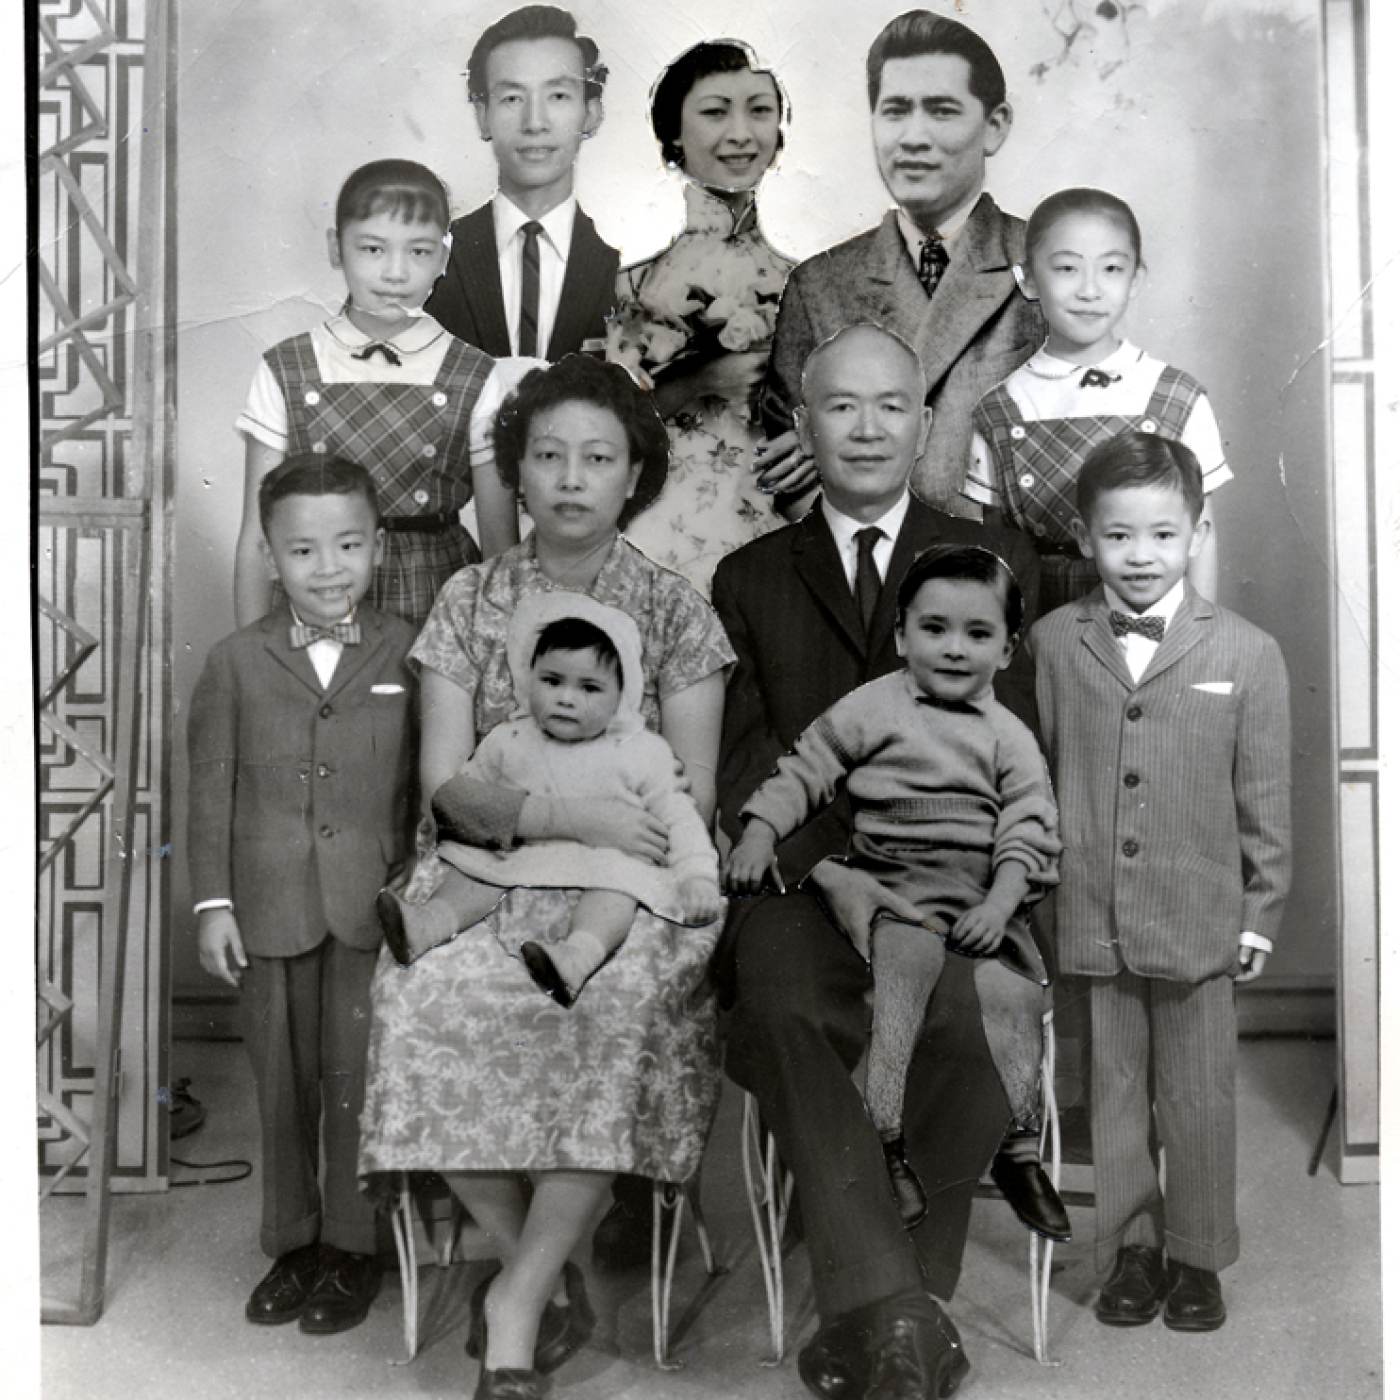  2004.005.055 A composite family portrait of the Low Family, held together with masking tape. The base photograph was taken ca. 1961 with additional photographs affixed at an unknown date. Lin S. Low is the elderly man in the center. His wife, Kow Gin Mark, is seated next to him. Clockwise from left are: Mildred Y. Lee, daughter; Gim, son; Moo Gee, daughter; Stanley Wong, son-in-law (Moo Gee's husband); Marilyn, daughter; Kam F. (Johnny), son; David, grandson; Pauline, granddaughter; Kam C. (Danny), son. Museum of Chinese in America (MOCA) Collection. 
2004.005.055 Low Family 的复合全家福，用胶带固定在一起。基础照片拍摄于大约 1961 年，上面附有未知日期的附加照片。 Lin S. Low 是中间的老人。他的妻子 Kow Gin Mark 坐在他旁边。左起顺时针为：Mildred Y. Lee，女儿；吉姆（Gim），儿子；穆吉（Moo Gee），女儿； Stanley Wong，女婿（穆吉的丈夫）；玛丽莲（Marilyn），女儿； Kam F. (Johnny)，儿子；大卫（David），孙子；宝琳（Pauline,），孙女； Kam C. (Danny)，儿子。美国华人博物馆（MOCA）馆藏。